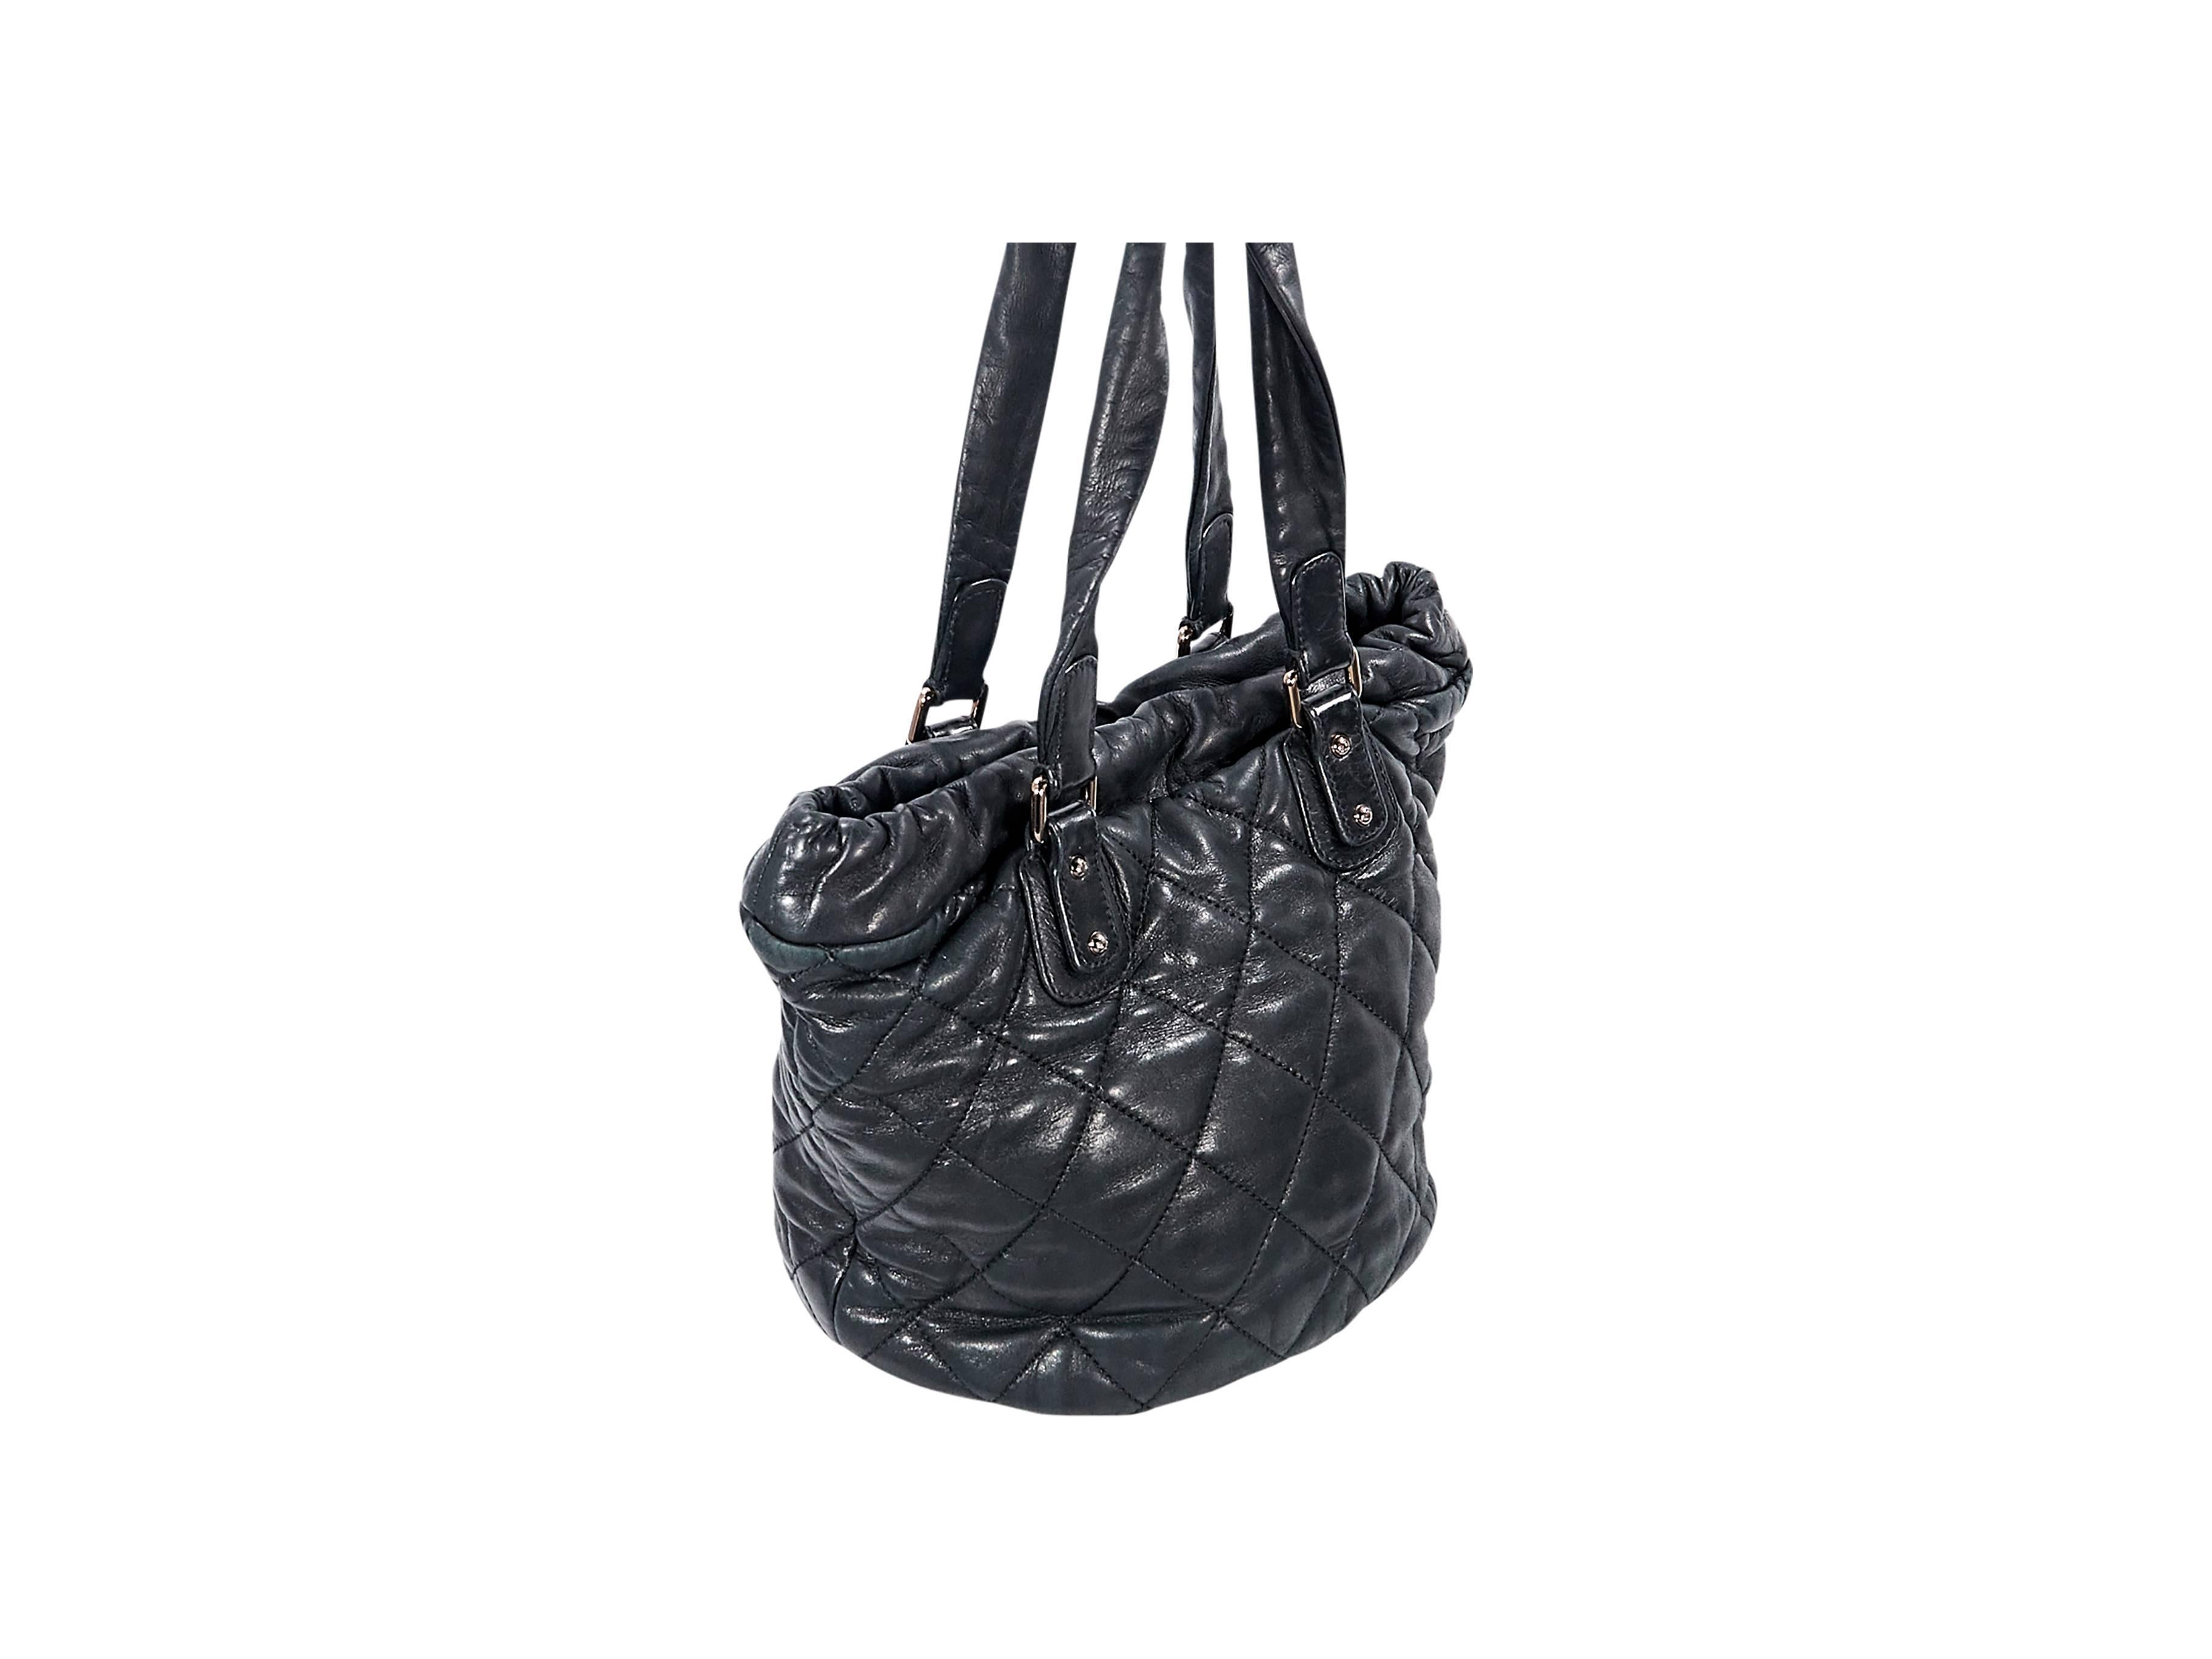 Product details:  Black quilted leather shoulder bag by Chanel.  Dual shoulder straps.  Drawstring top.  Magnetic snap closure.  Lined interior with inner zip and slide pockets.  Goldtone hardware.  15"L x 10"H x 5"D.  8.5"D